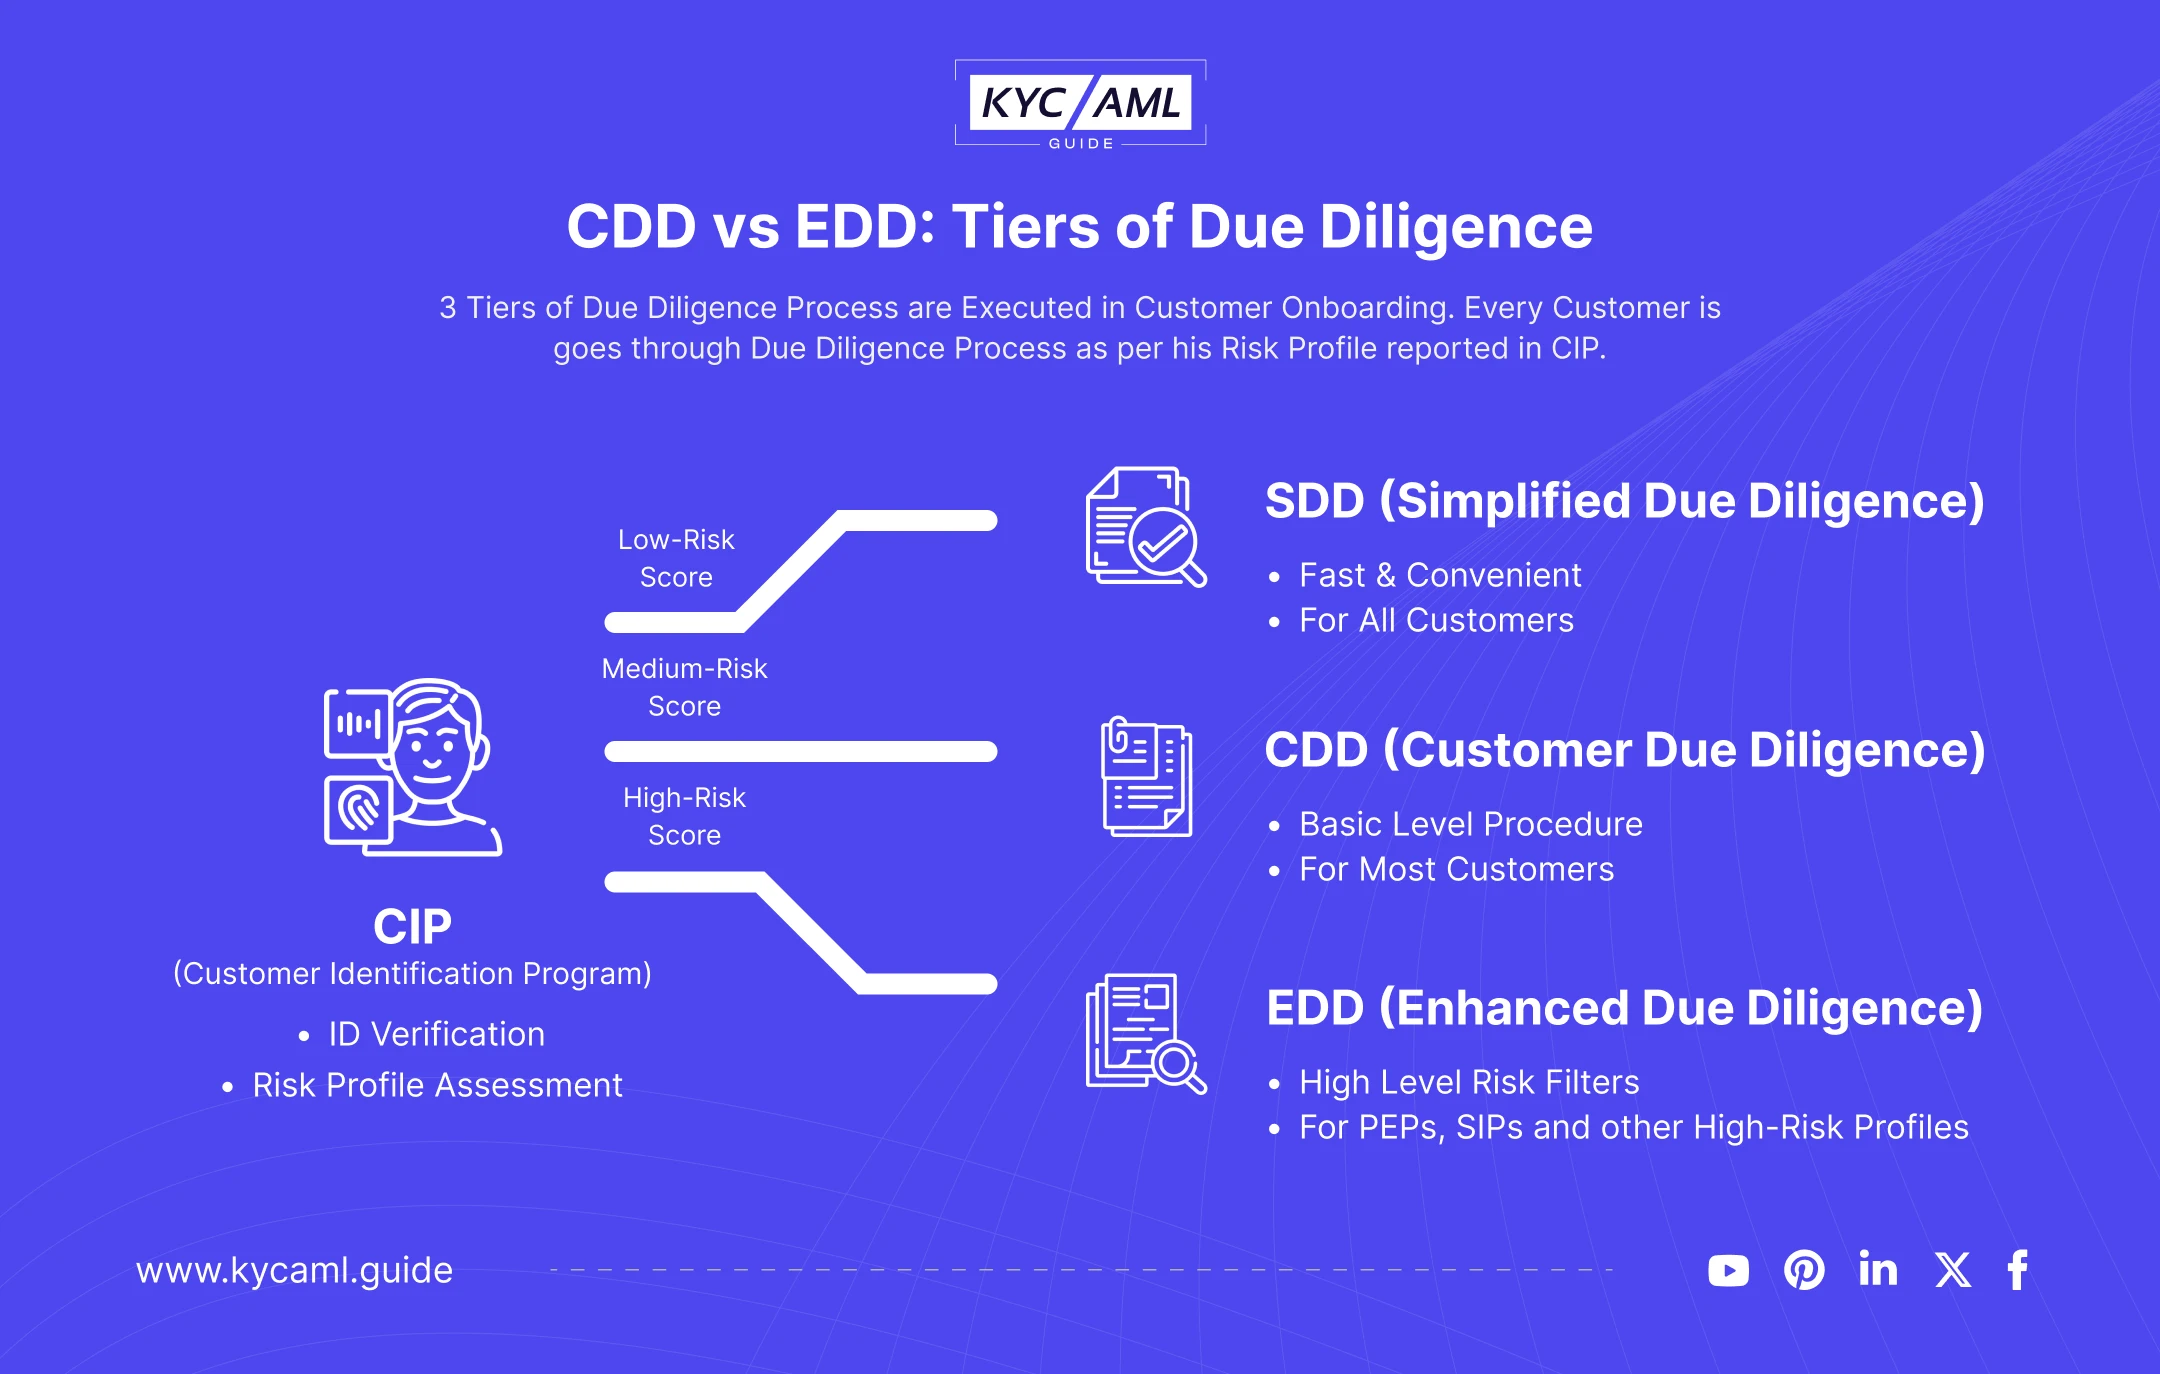 The 3 Tiers of Due Diligence: 1) SDD 2) CDD 3) EDD